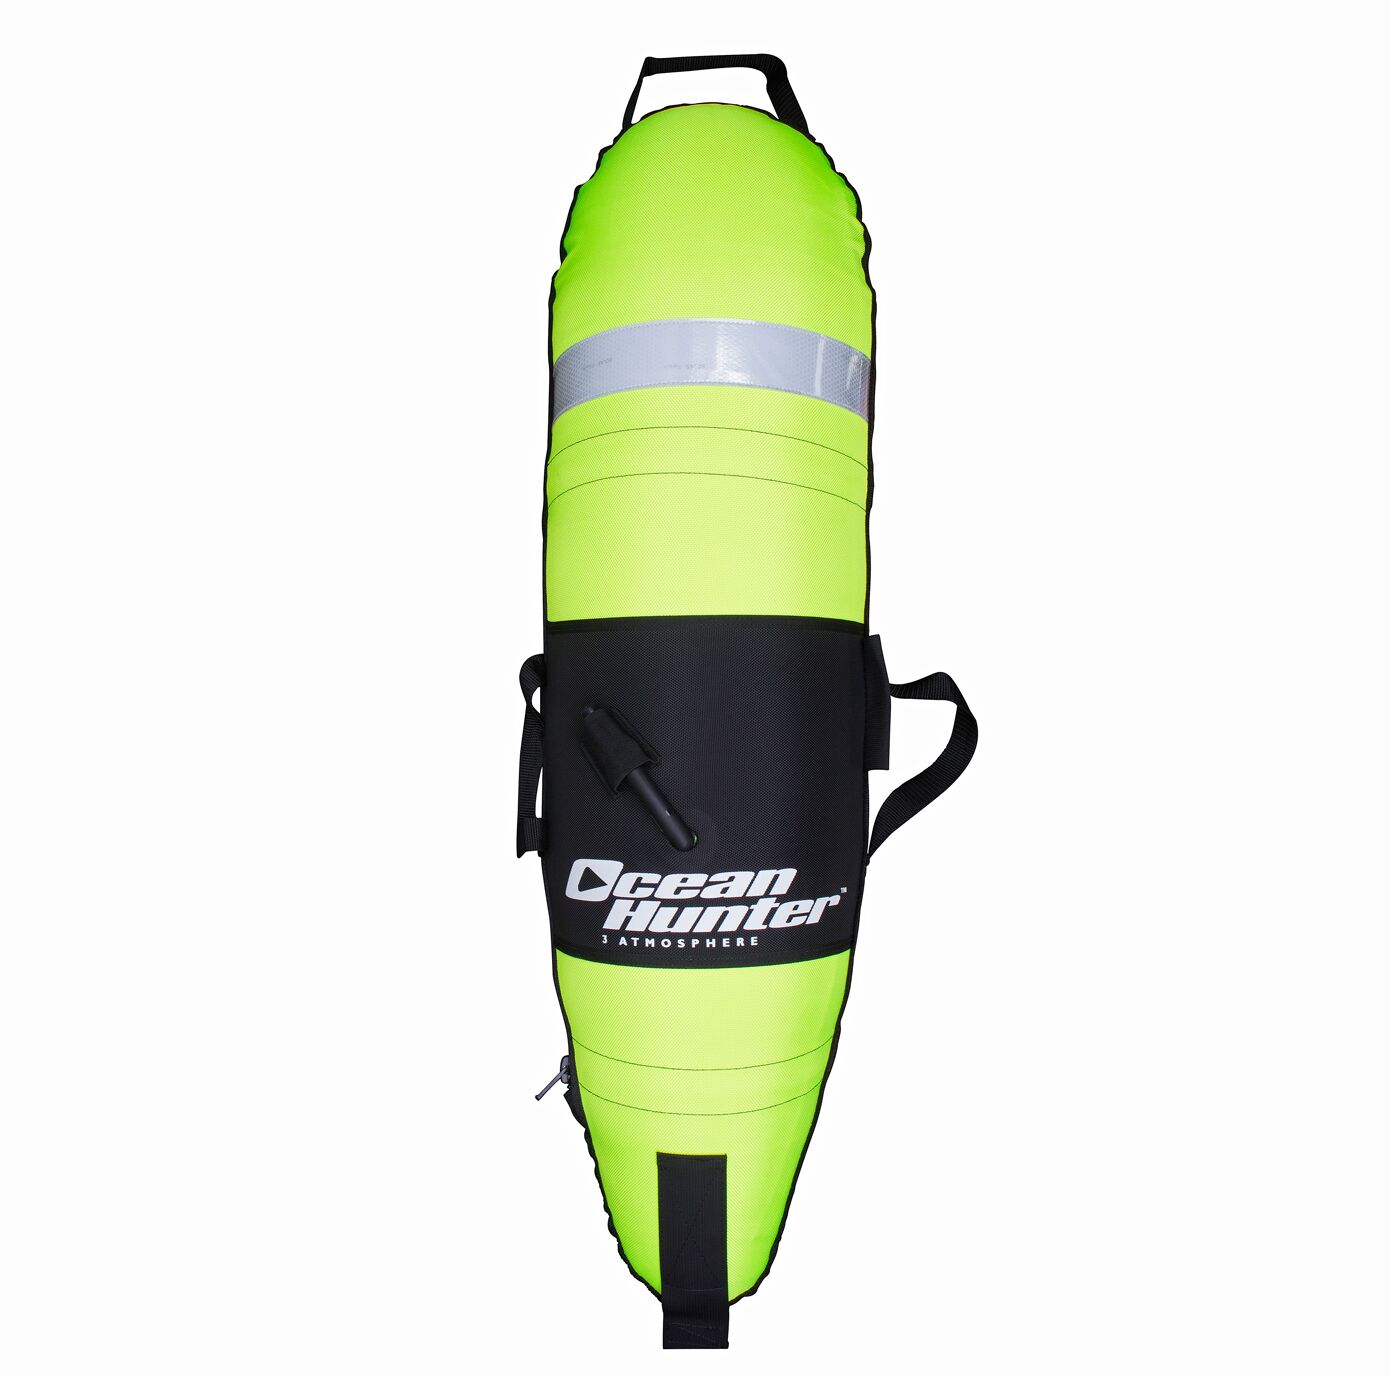 Ocean Hunter 3ATM 3 Atmosphere Spearfishing Dive Signal Maker Buoy